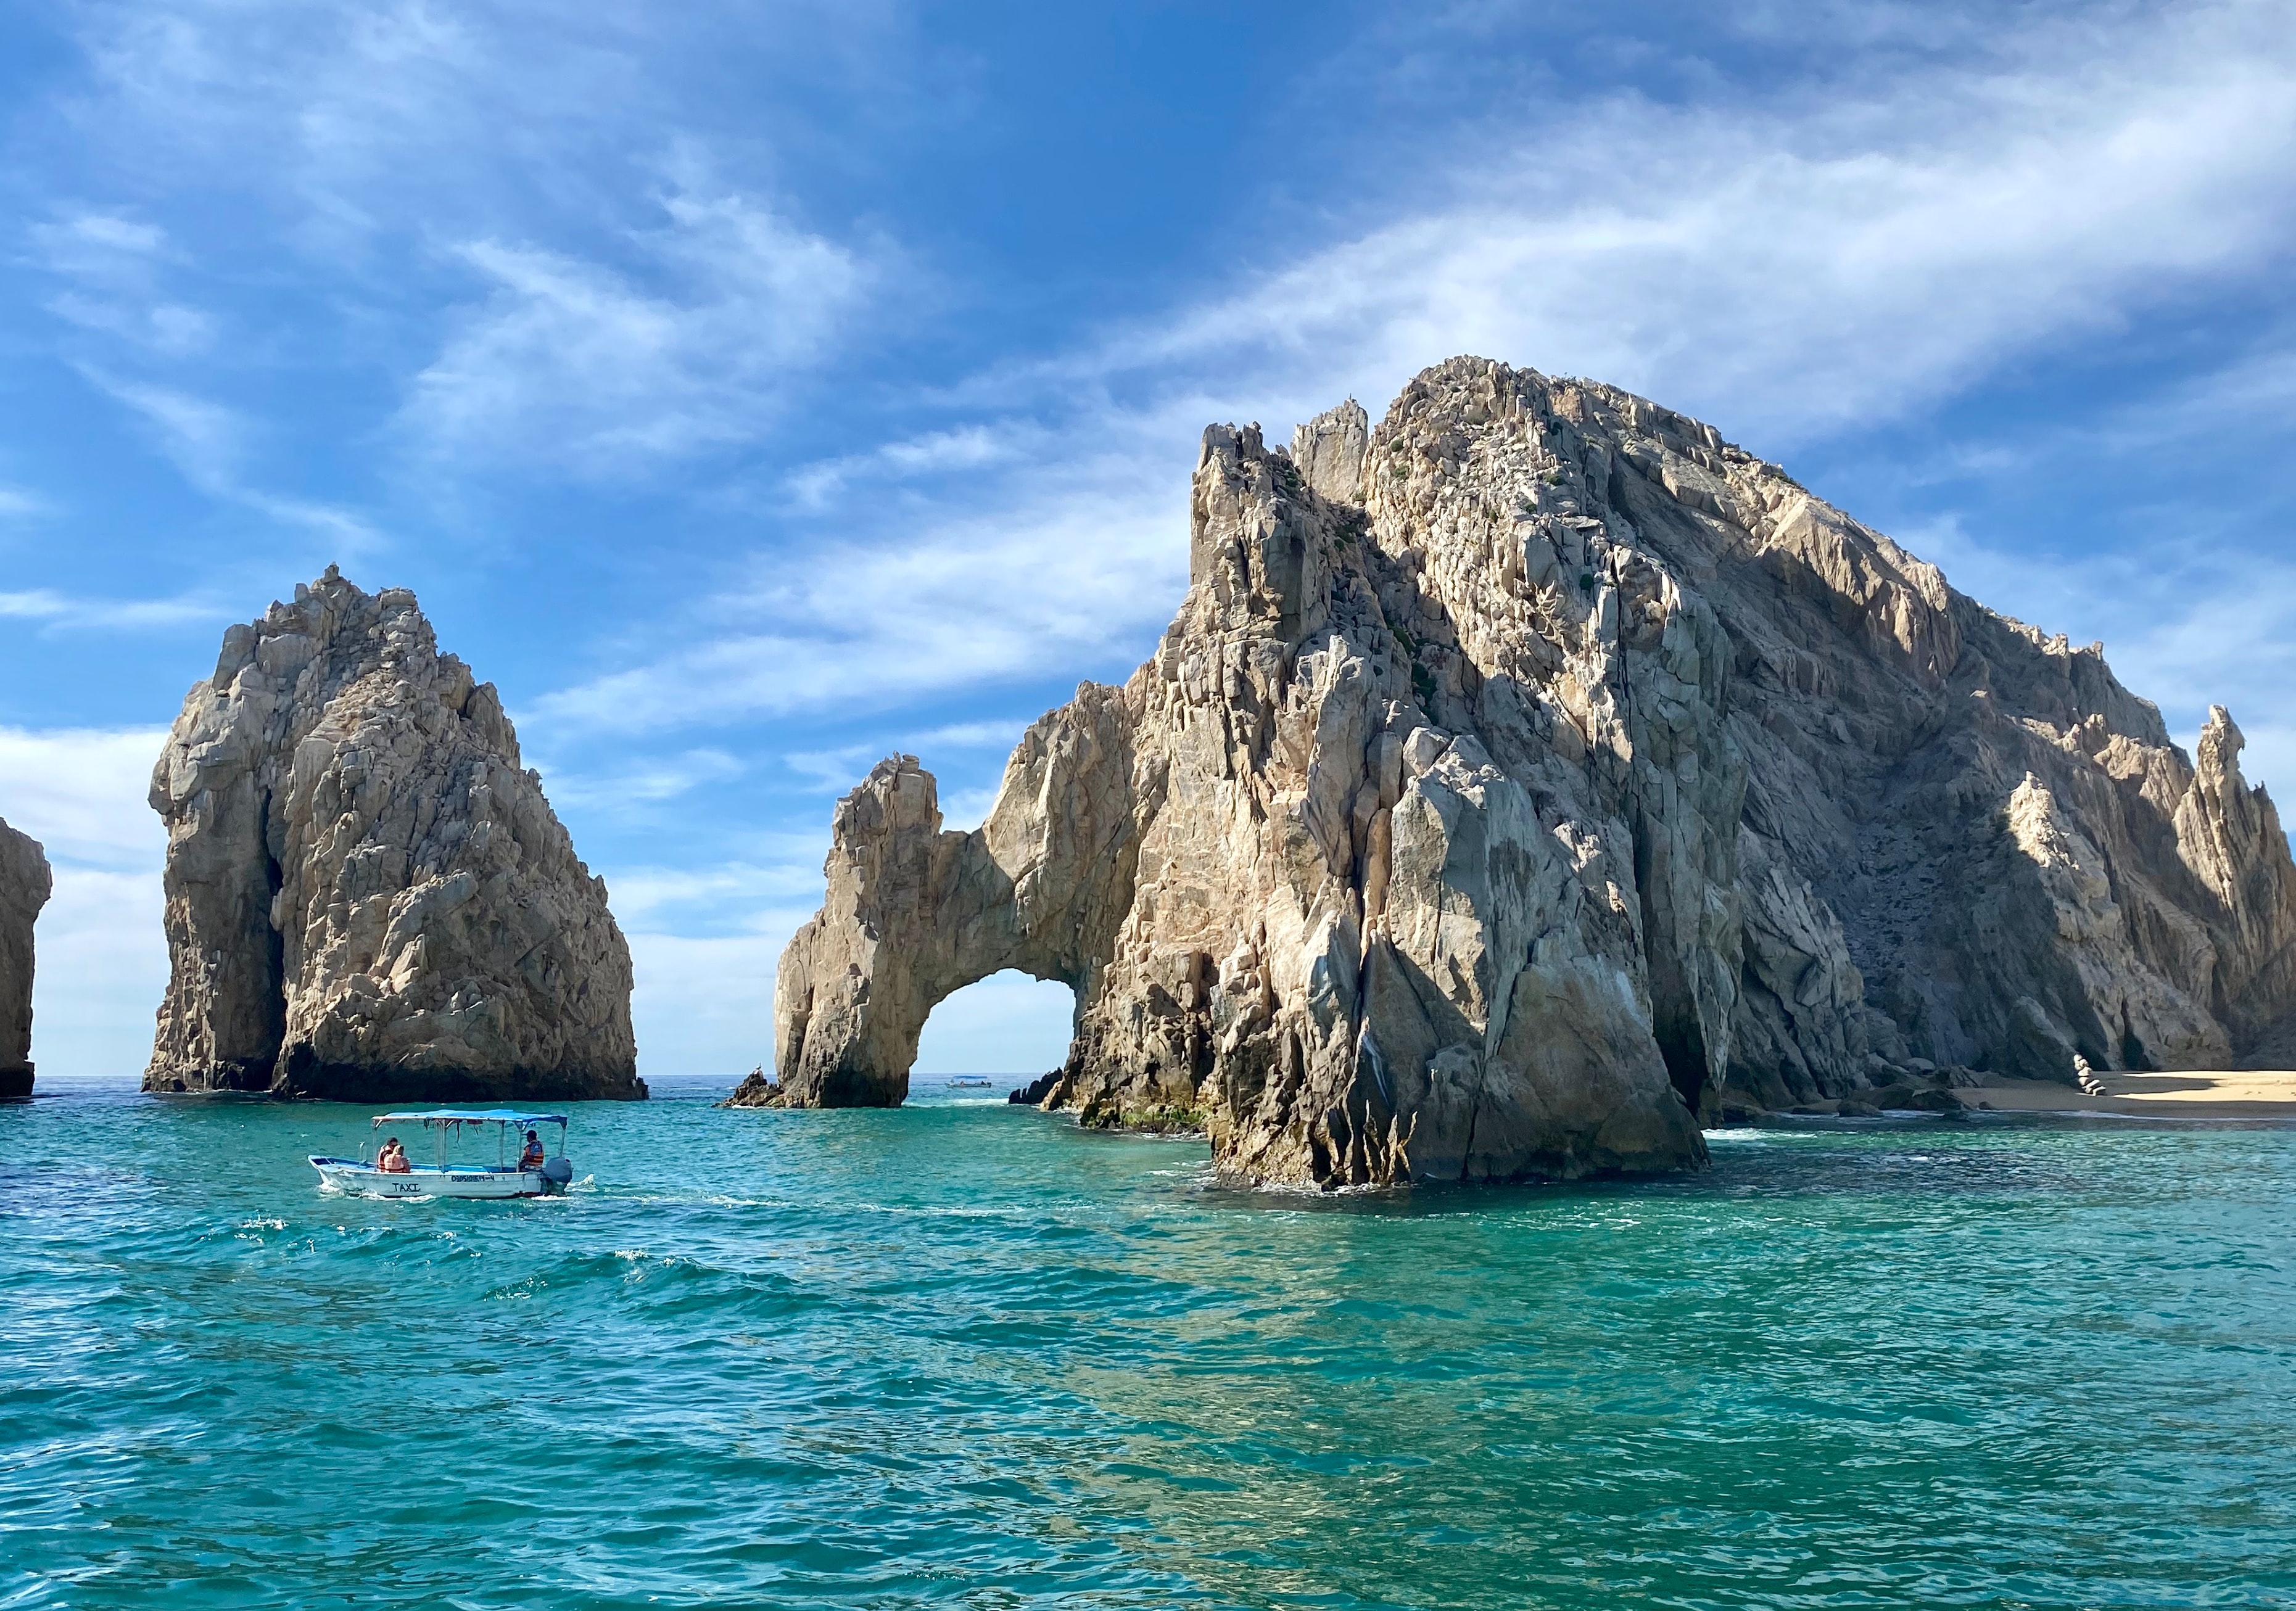 Travelers flock to Mexico for amazing food, gorgeous beaches, and rich history ... but nobody wants to chase a Wi-Fi connection.